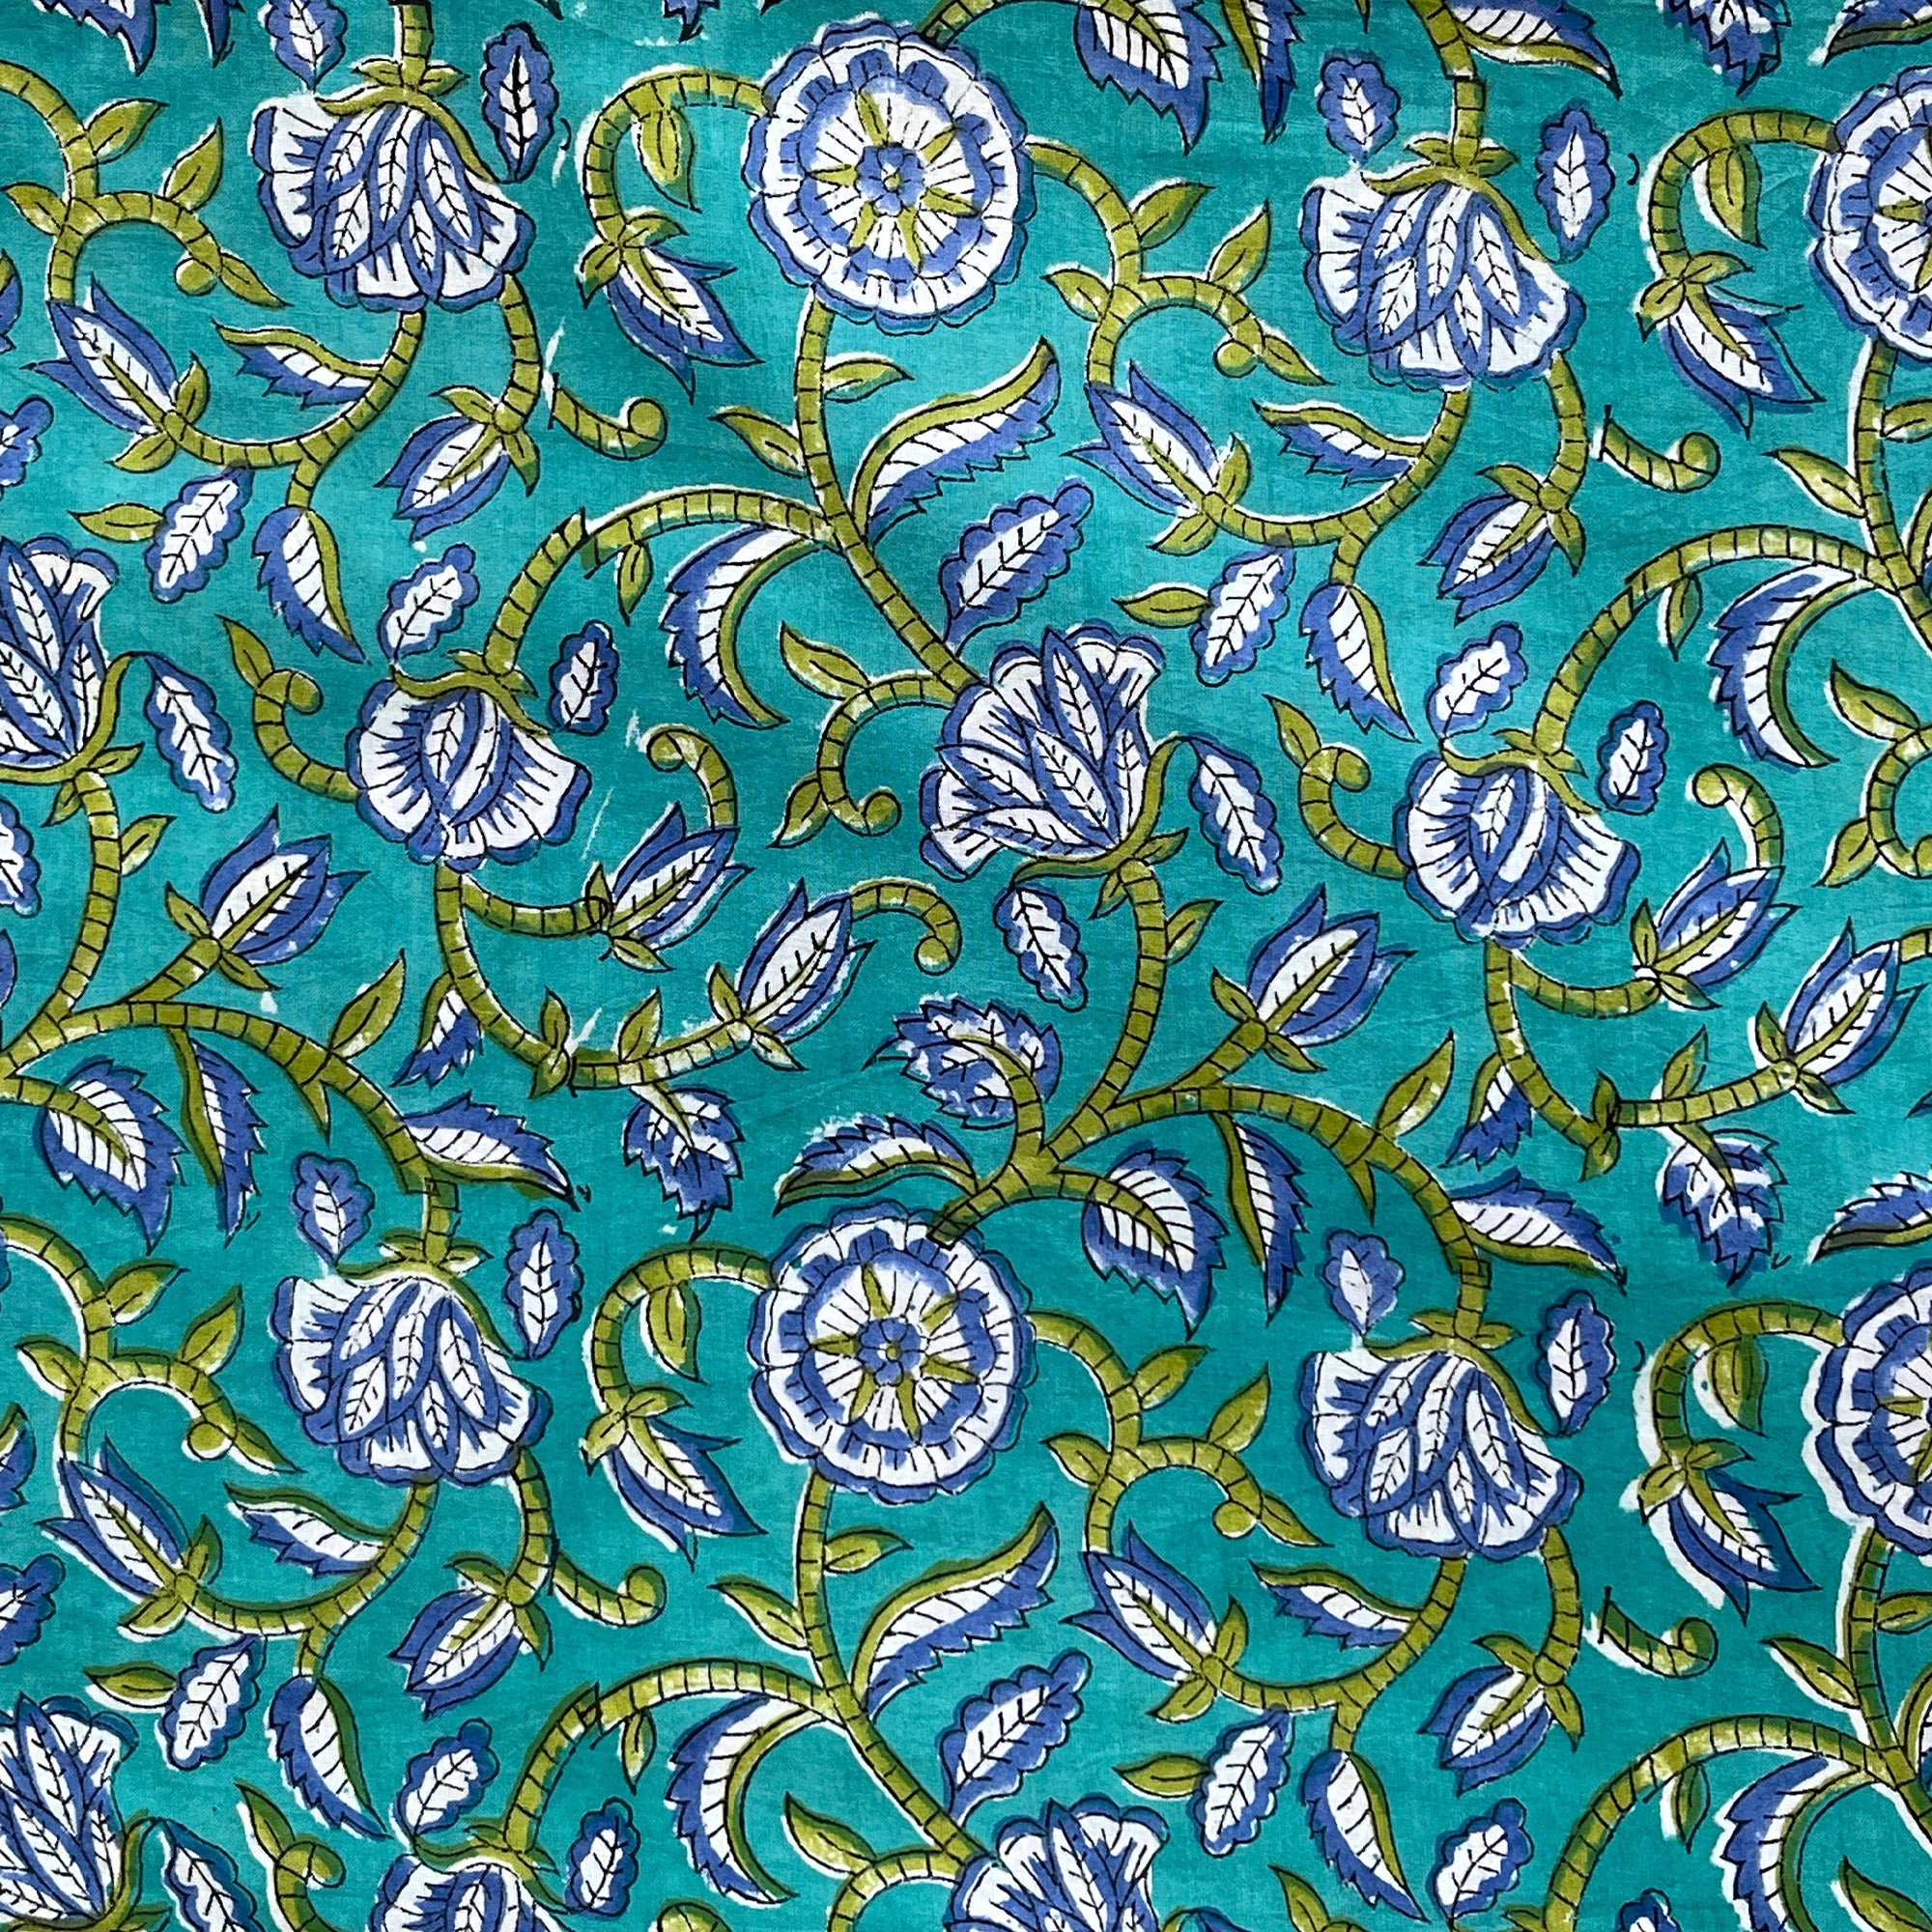 Blue Green Floral Jaal Rapid Hand Block Printed Cotton Fabric